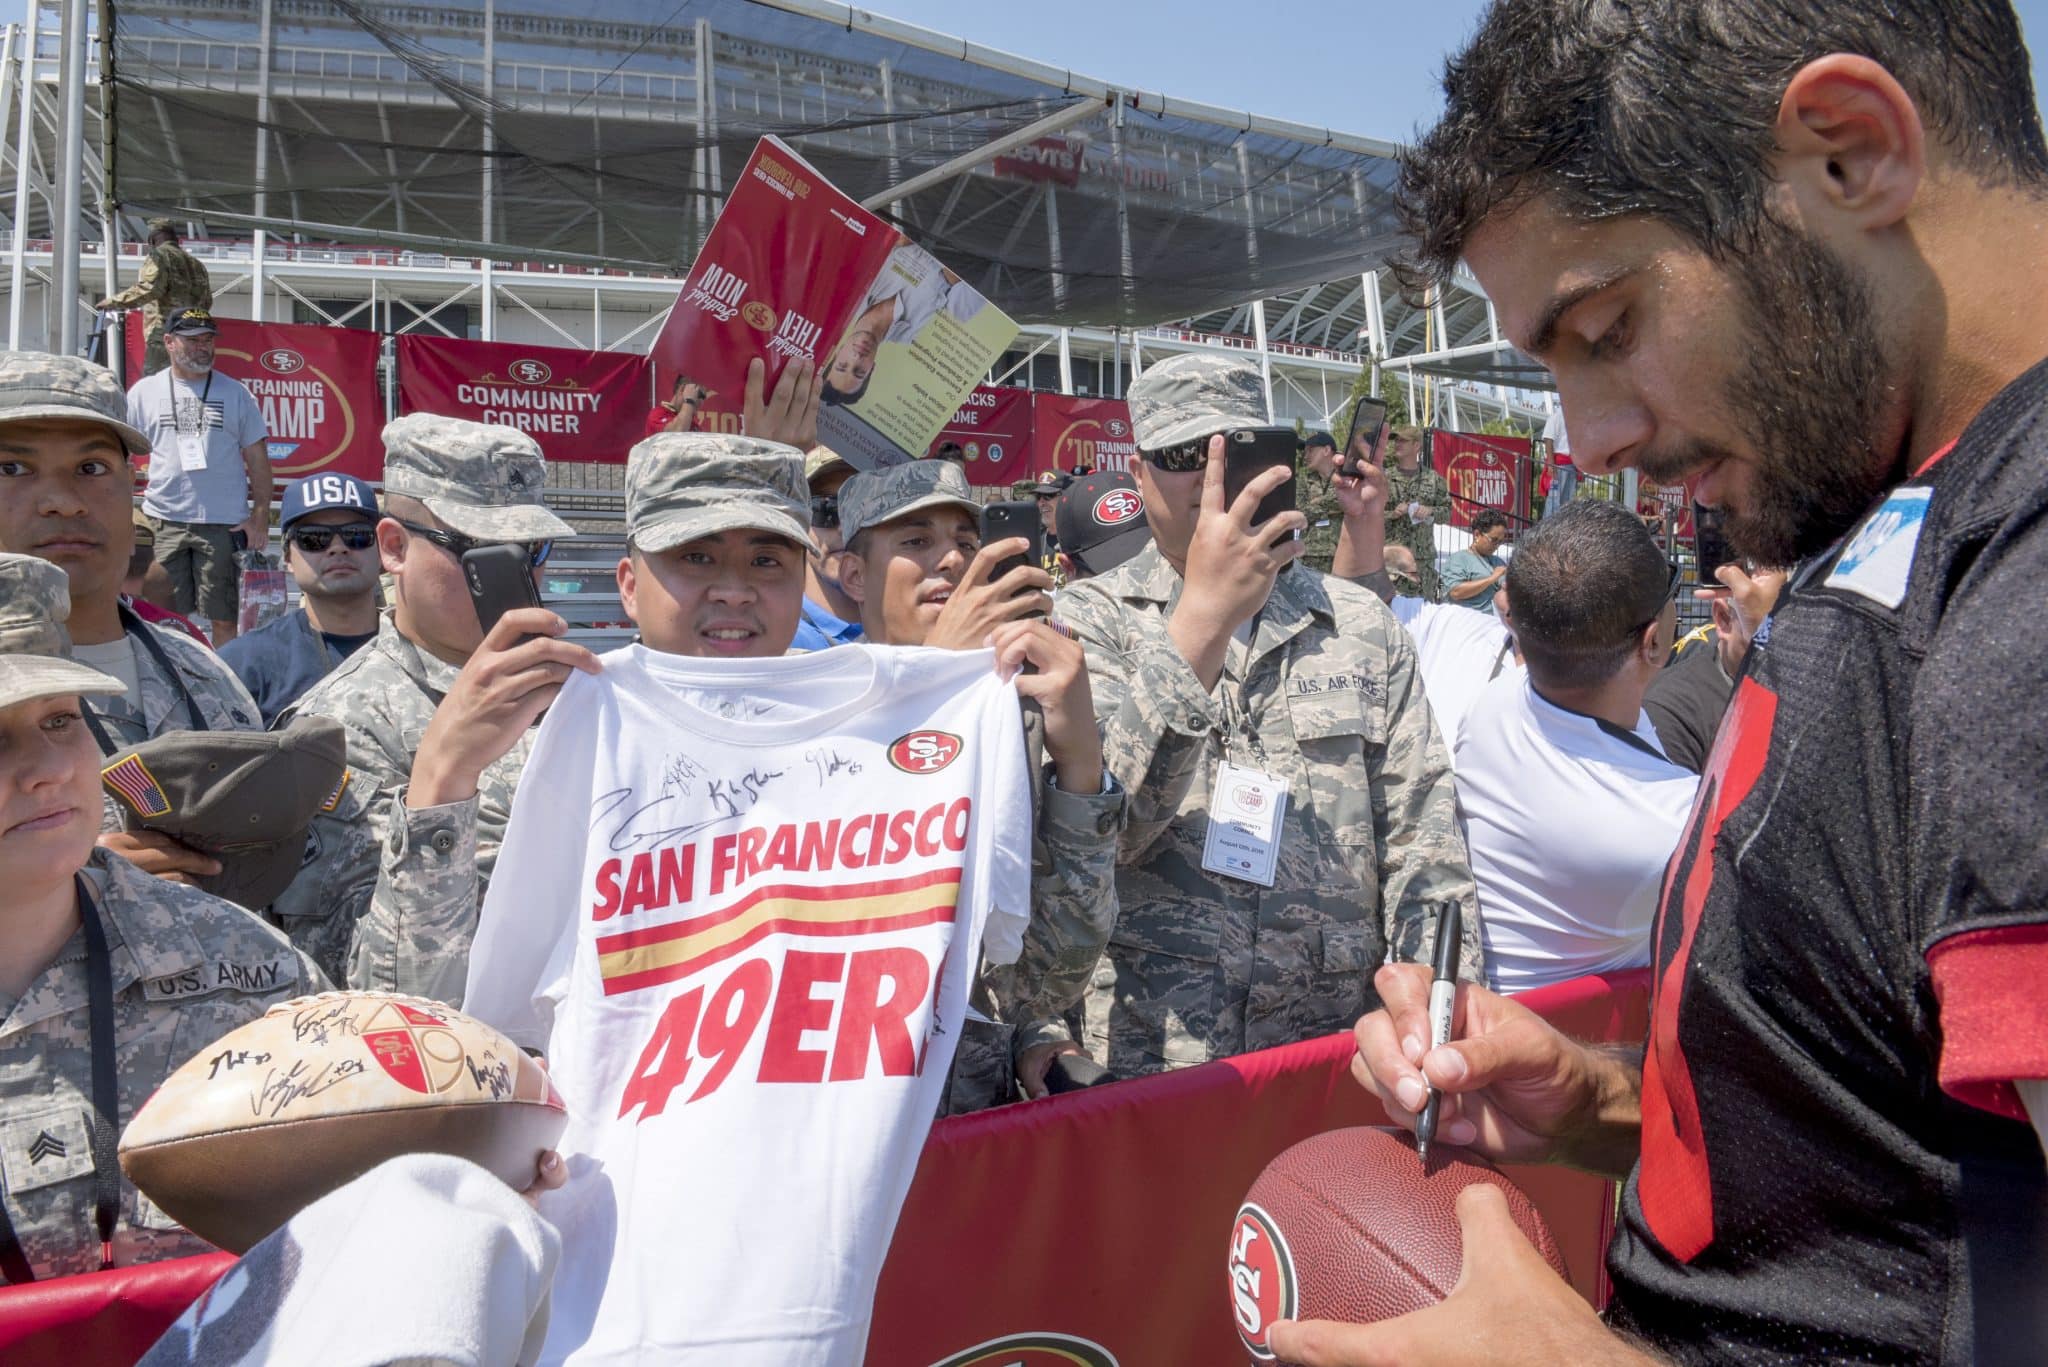 Jimmy Garoppolo, a 49ers quarterback, signs a football for a fan at the SAP Performance Facility, Santa Clara, Calif., Aug. 12, 2018. The 49ers organization invited military members from the local area to observe their training camp during a military appreciation day. (U.S. Air Force photo by Lan Kim)